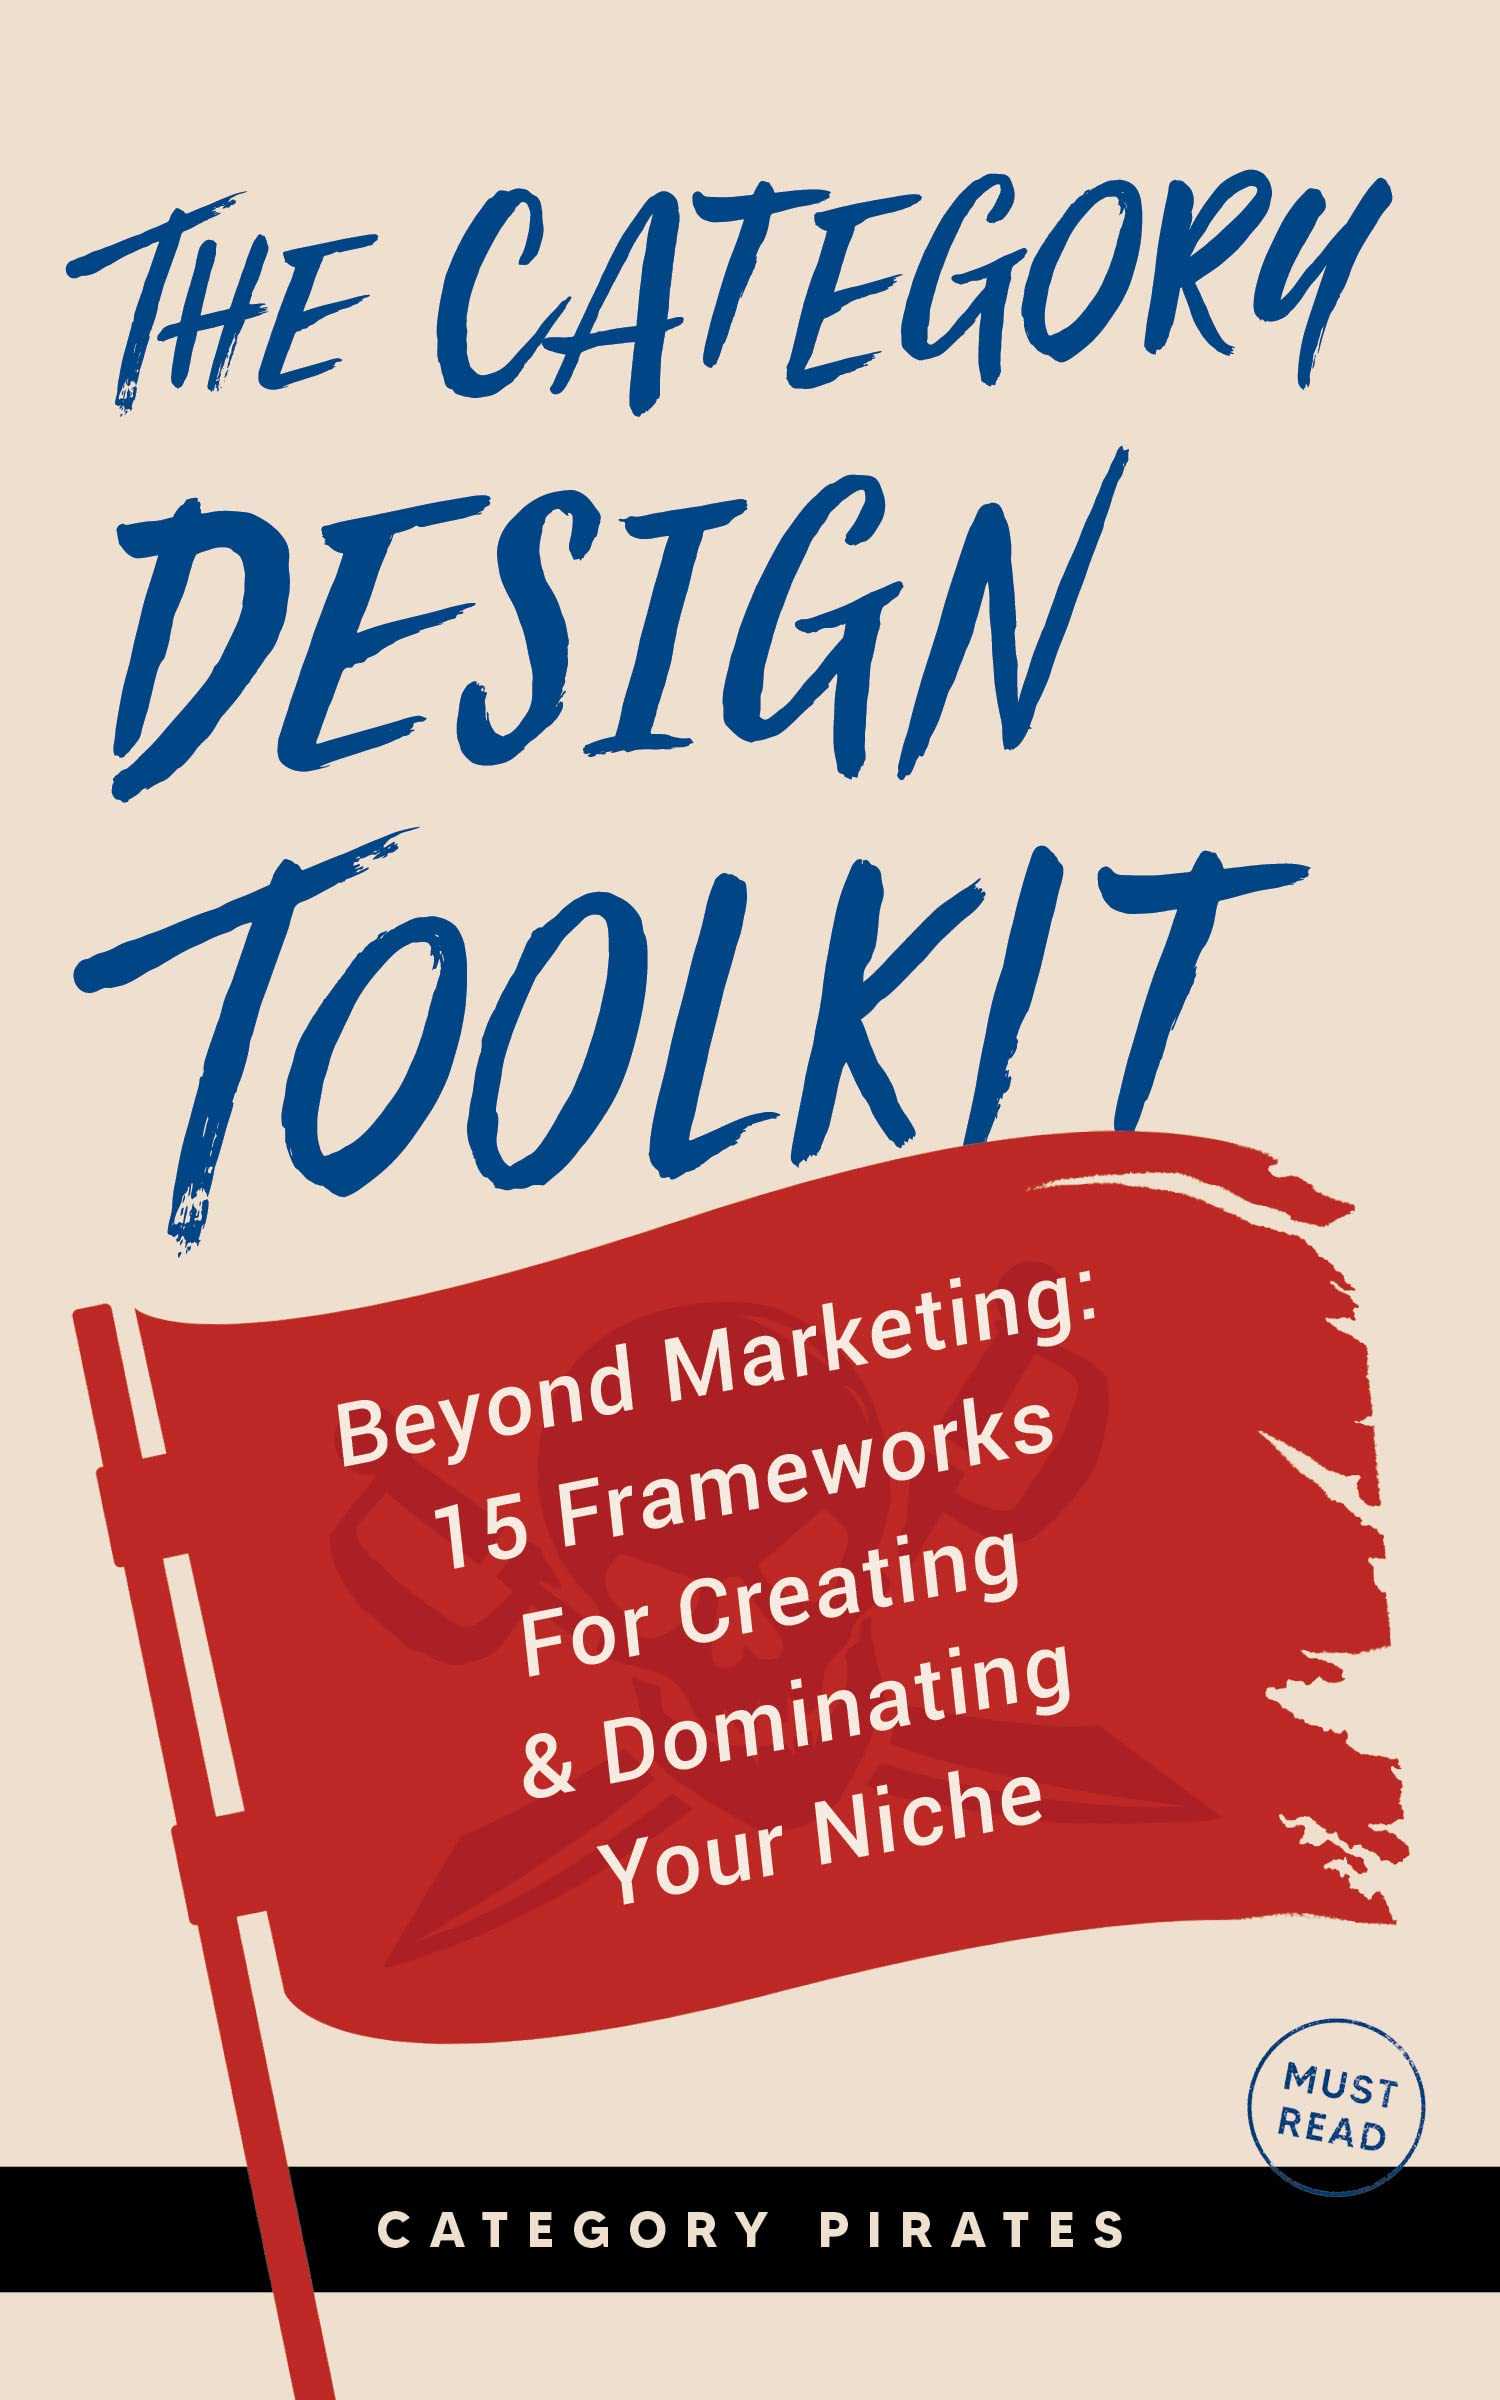 The Category Design Toolkit: Beyond Marketing: 15 Frameworks For Creating & Dominating Your Niche